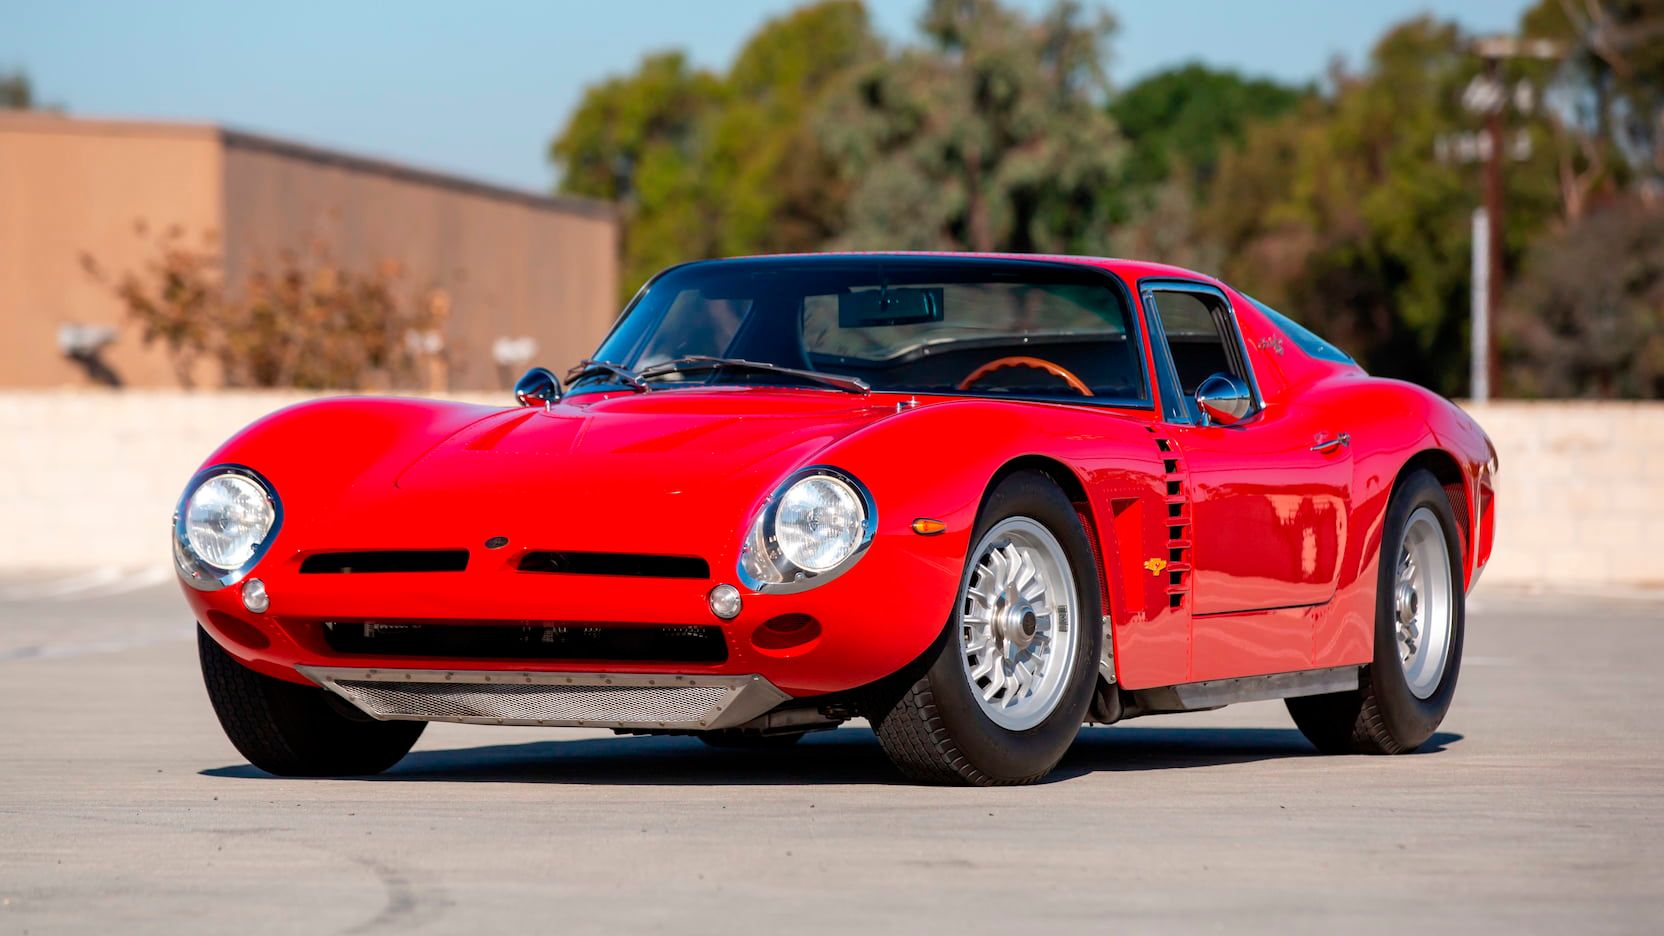 1965 Iso Grifo A3:C Bizzarrini, red, nose